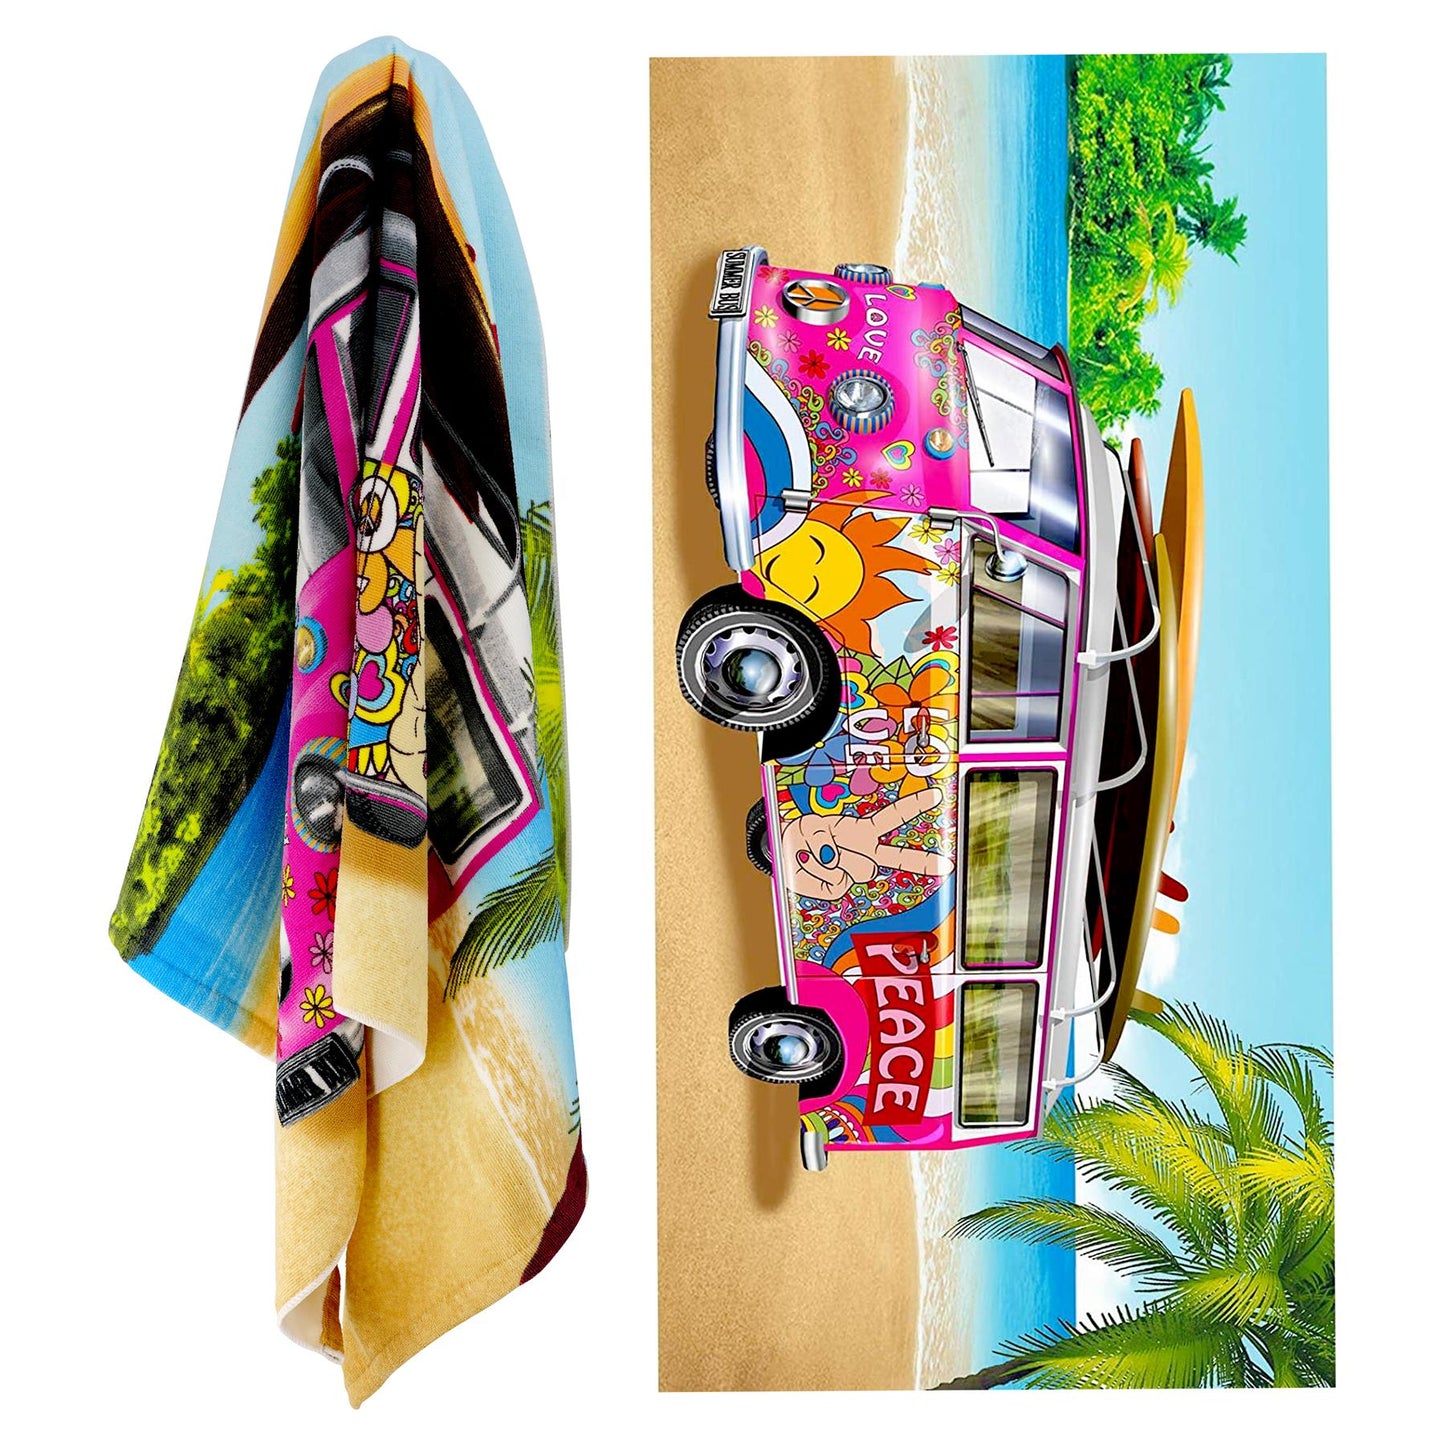 Pink Summer Bus Design Large Towel by Geezy - UKBuyZone